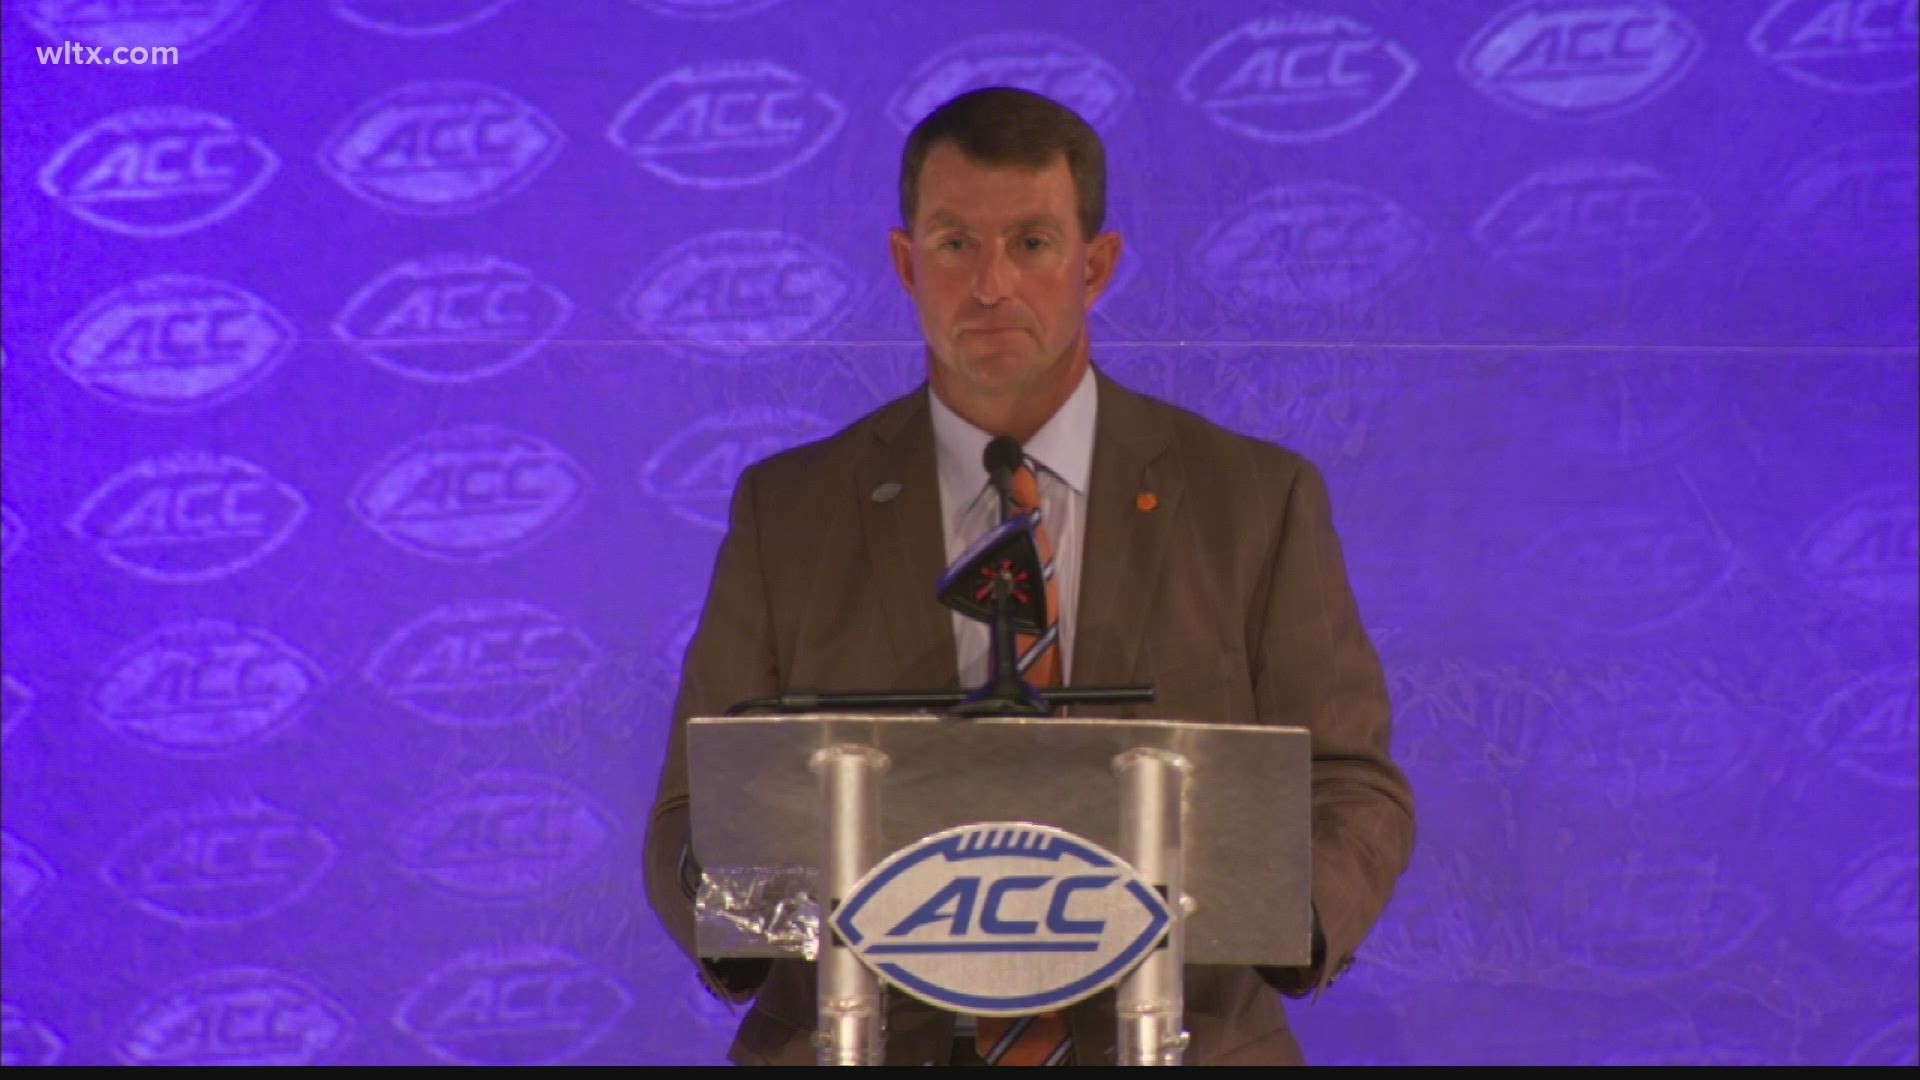 Clemson head football coach Dabo Swinney suggest the regular season might be shortened to 11 games to accomodate an expanded CFB playoff.